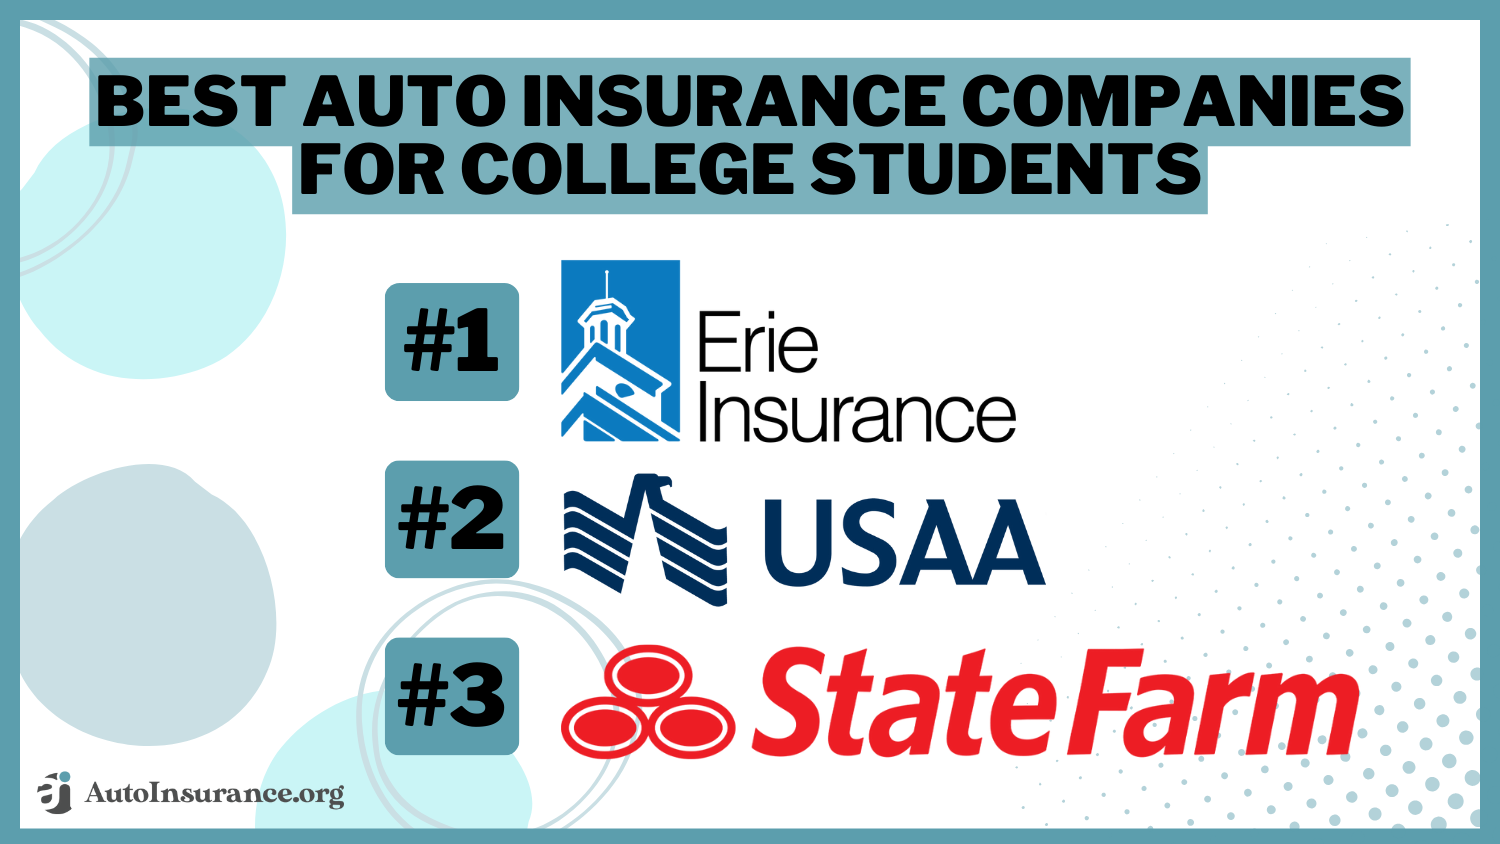 Best Auto Insurance Companies for College Students: Erie, USAA, State Farm